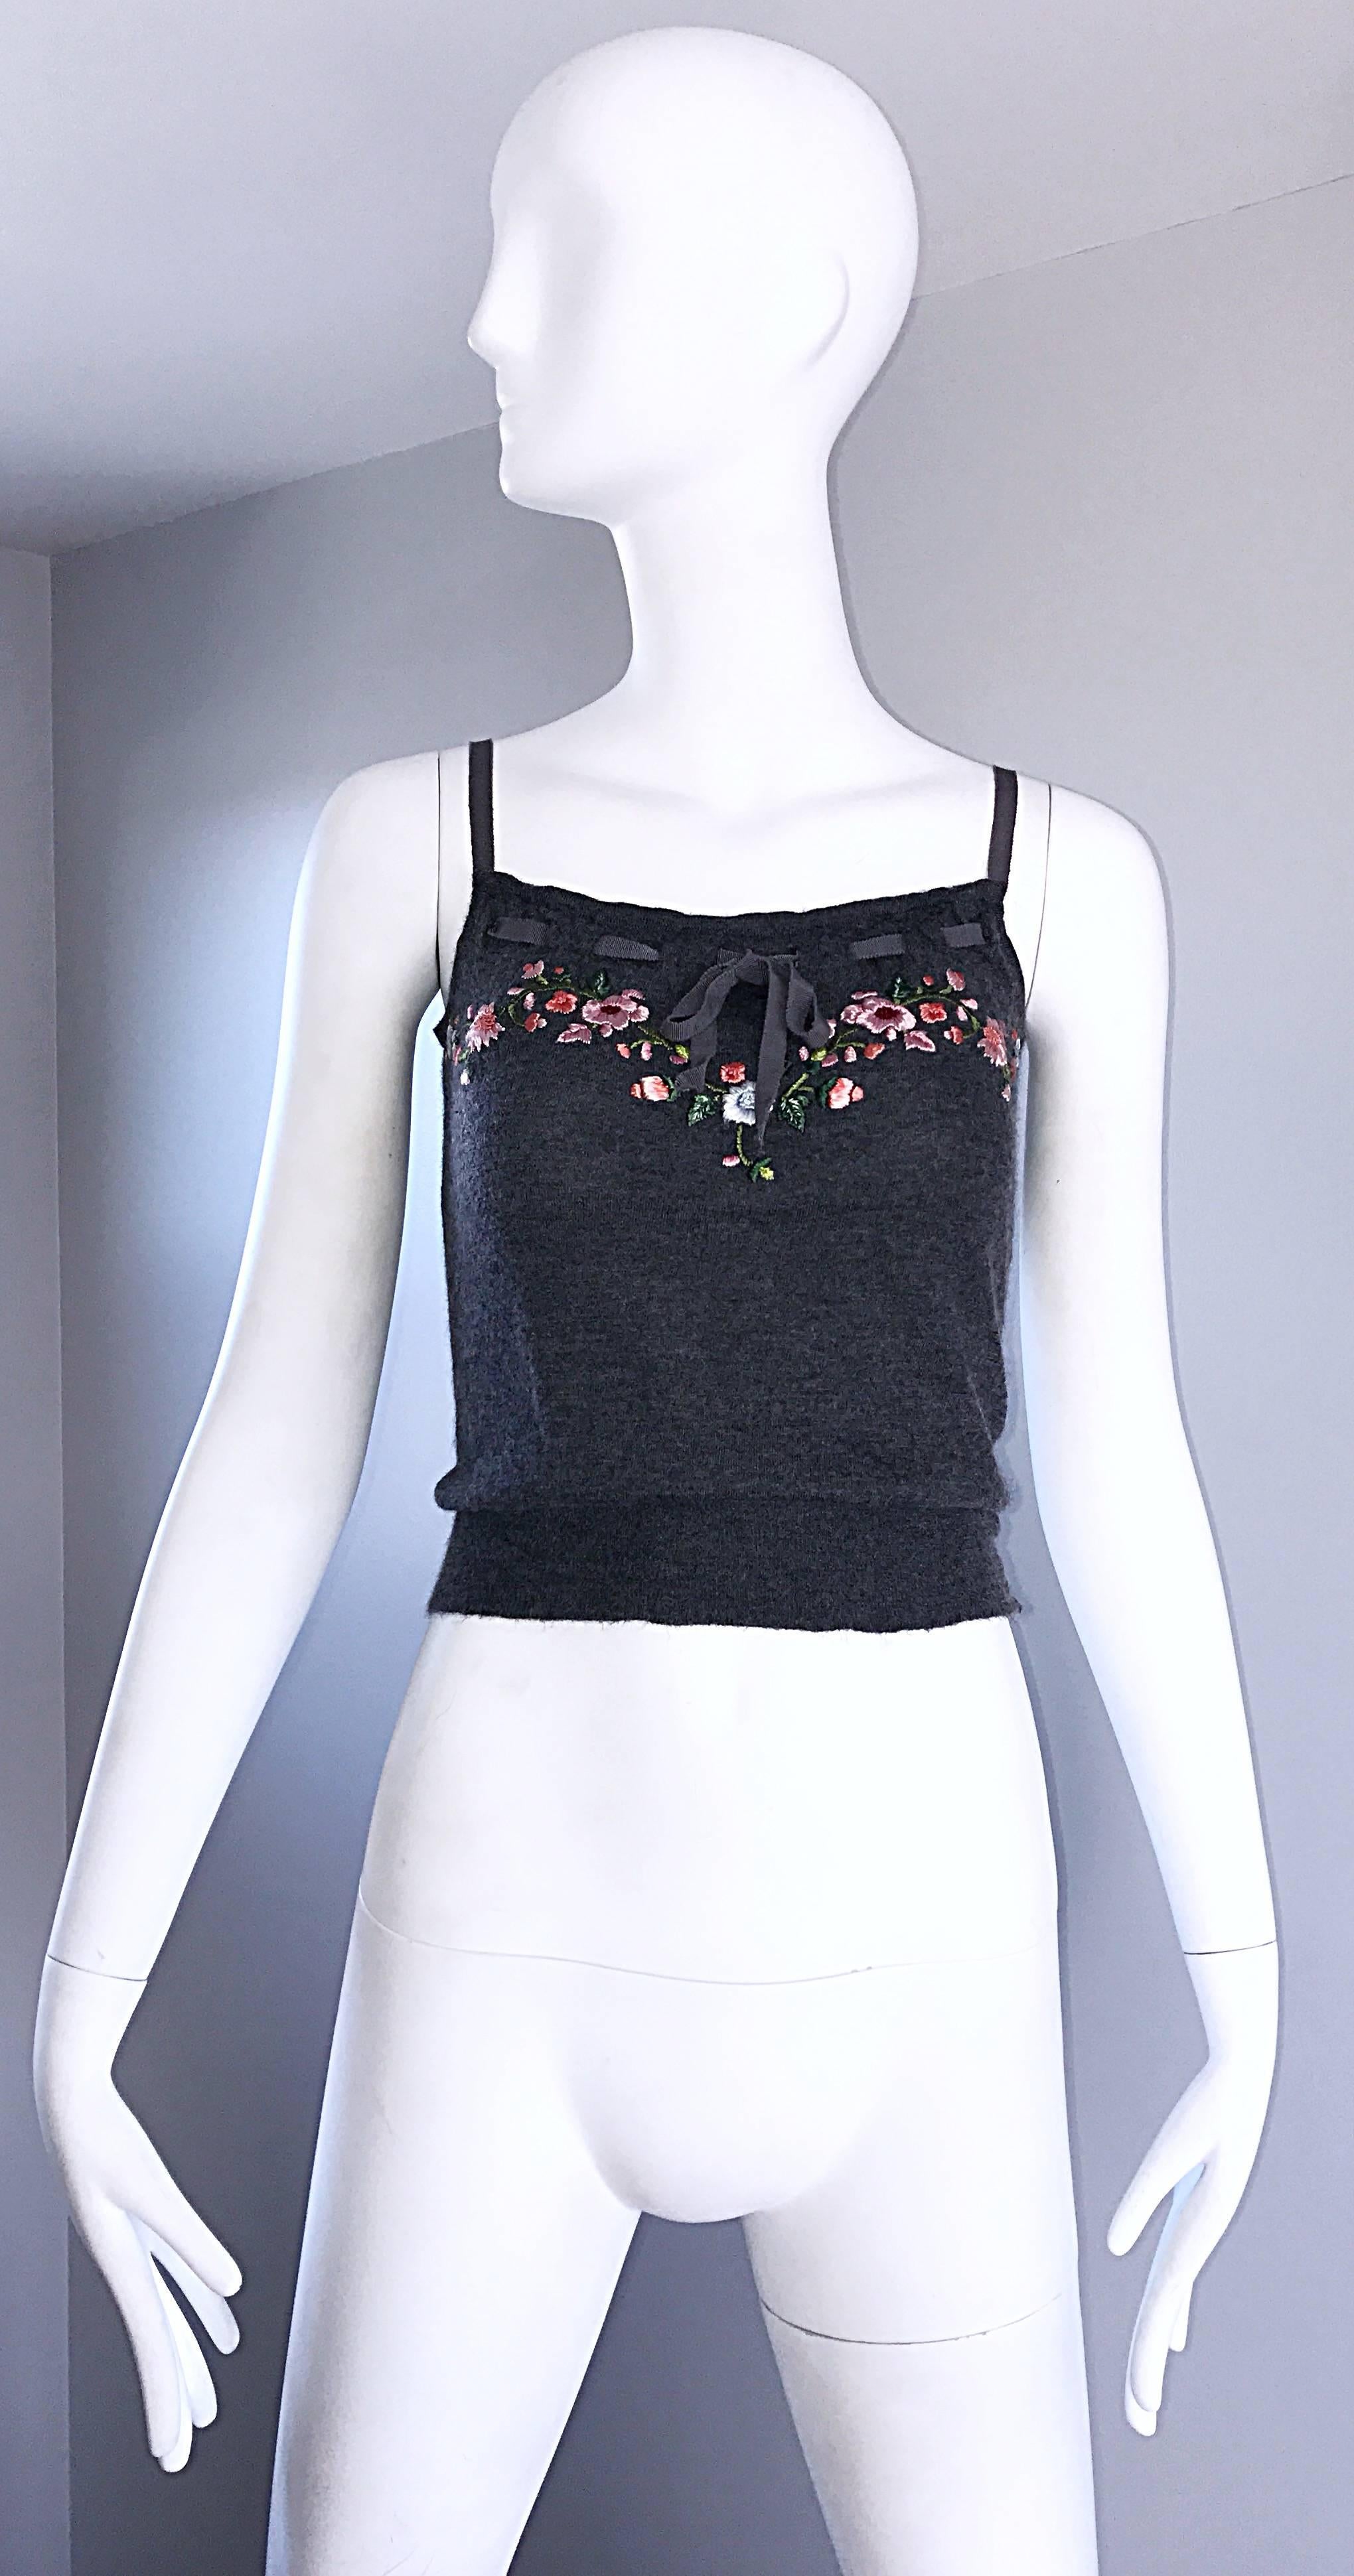 Beautiful vintage early 1990s 90s OSCAR DE LA RENTA gray cashmere cropped sweater top! Luxurious soft cashmere feels so good against the skin! Pink and blue hand embroidered flowers across the front and back bust. Silk grosgrain ribbon detail above